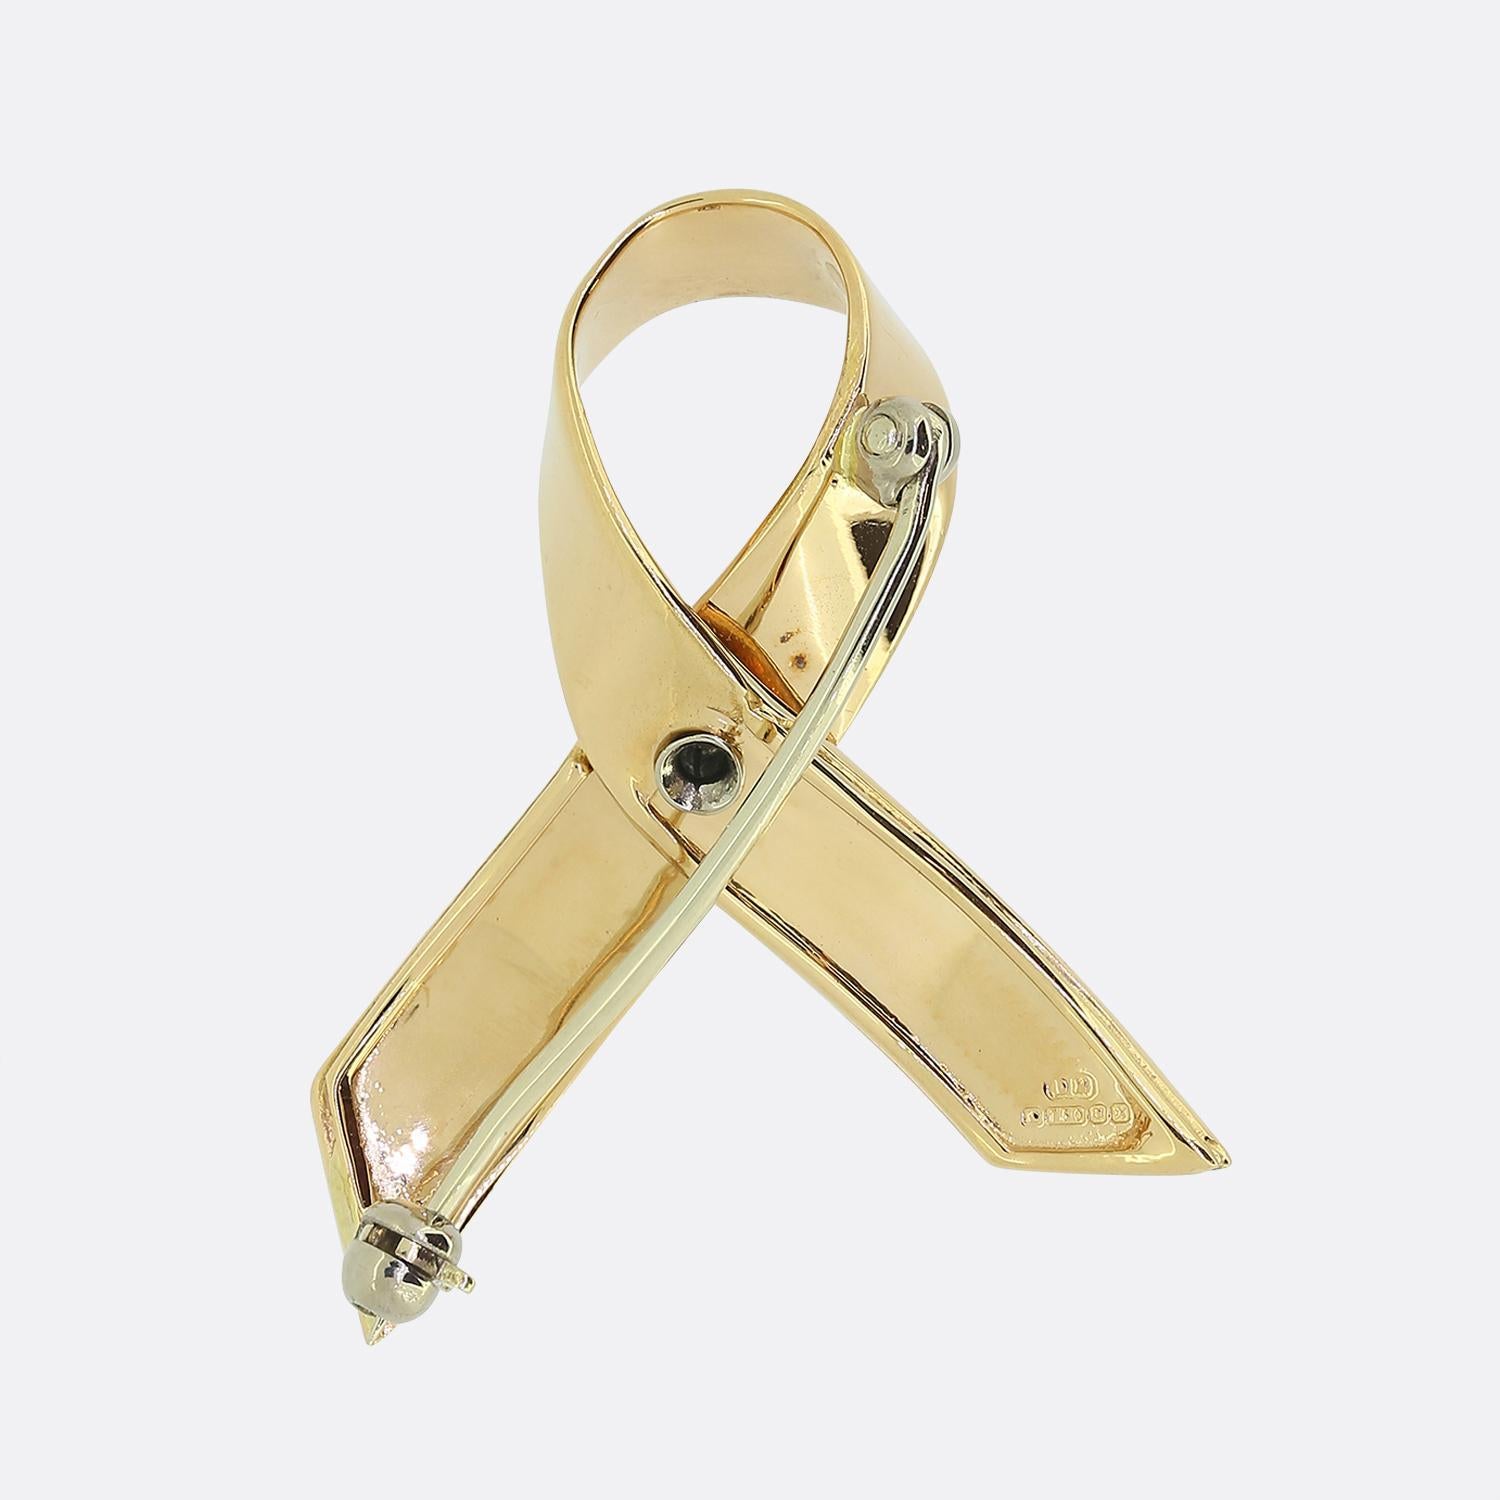 Here we have a wonderful brooch from the luxury jewellery designer David Morris. The brooch features a single diamond that sits in the centre of an elegant bow design.

Condition: Used (Excellent)
Weight: 5.6 grams
Dimensions: 33mm x 25mm x